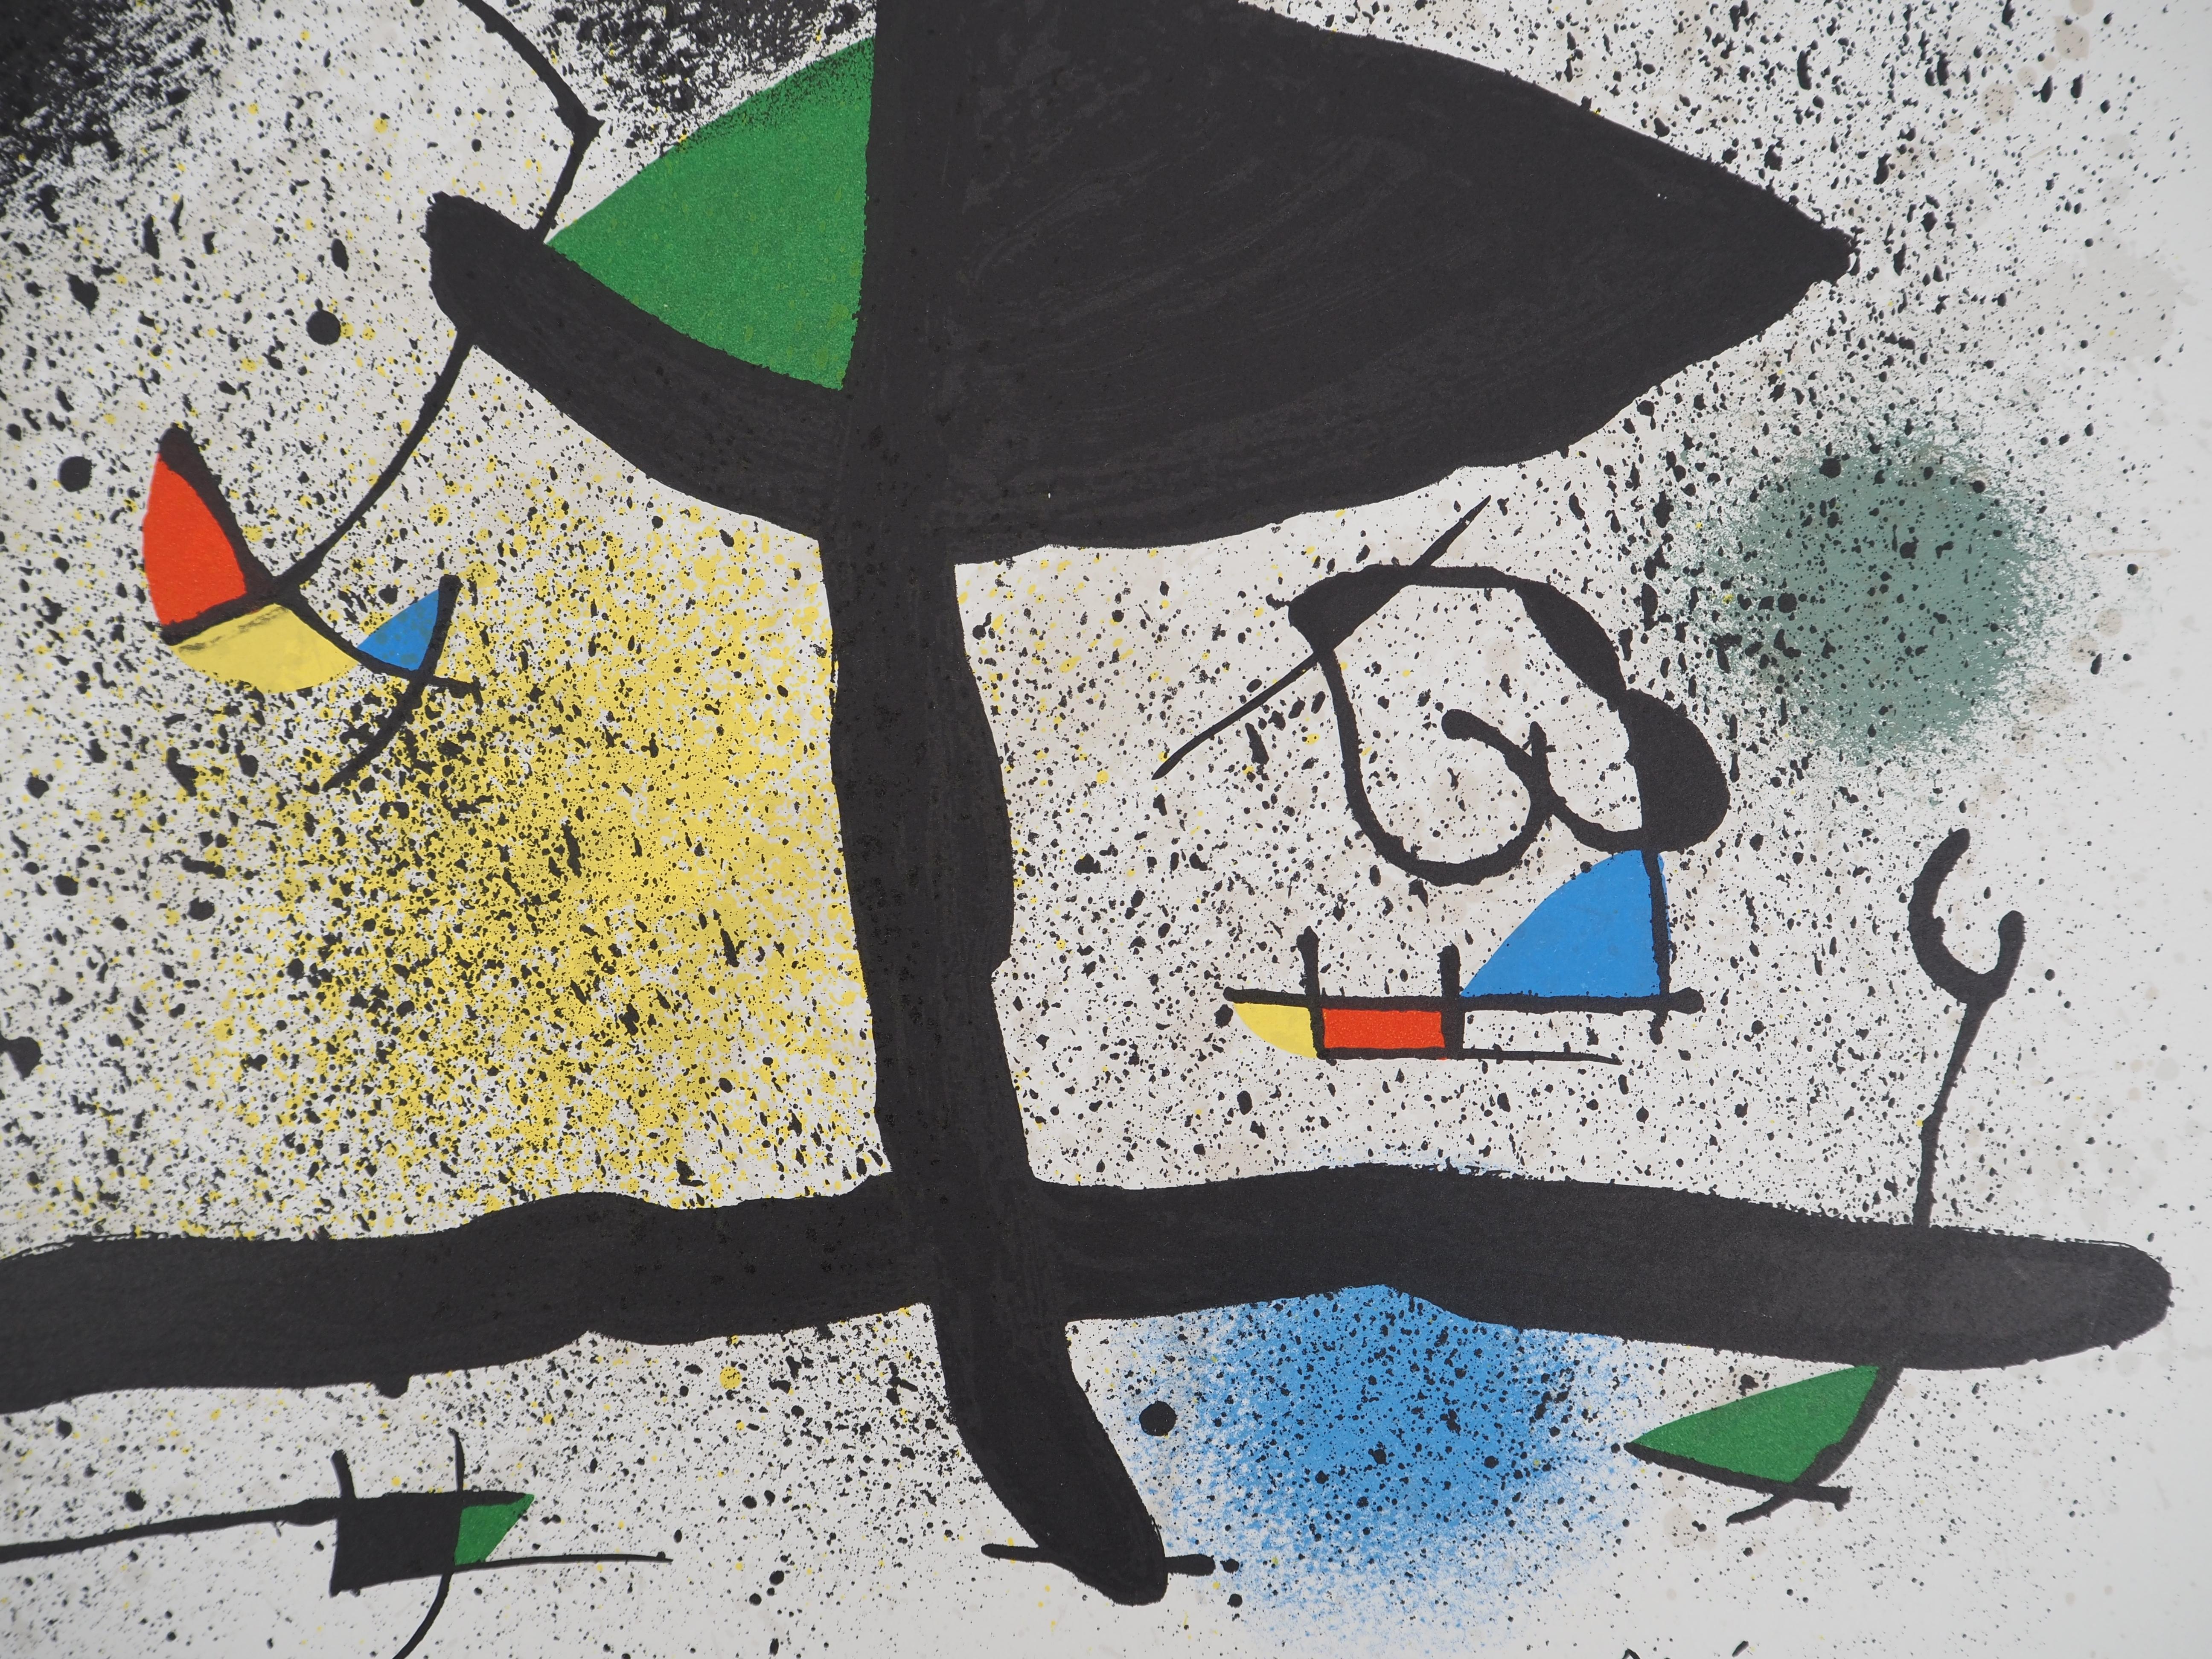 Surrealist Garden - Original Lithograph, Signed in the Plate - Mourlot 950 - Abstract Print by Joan Miró